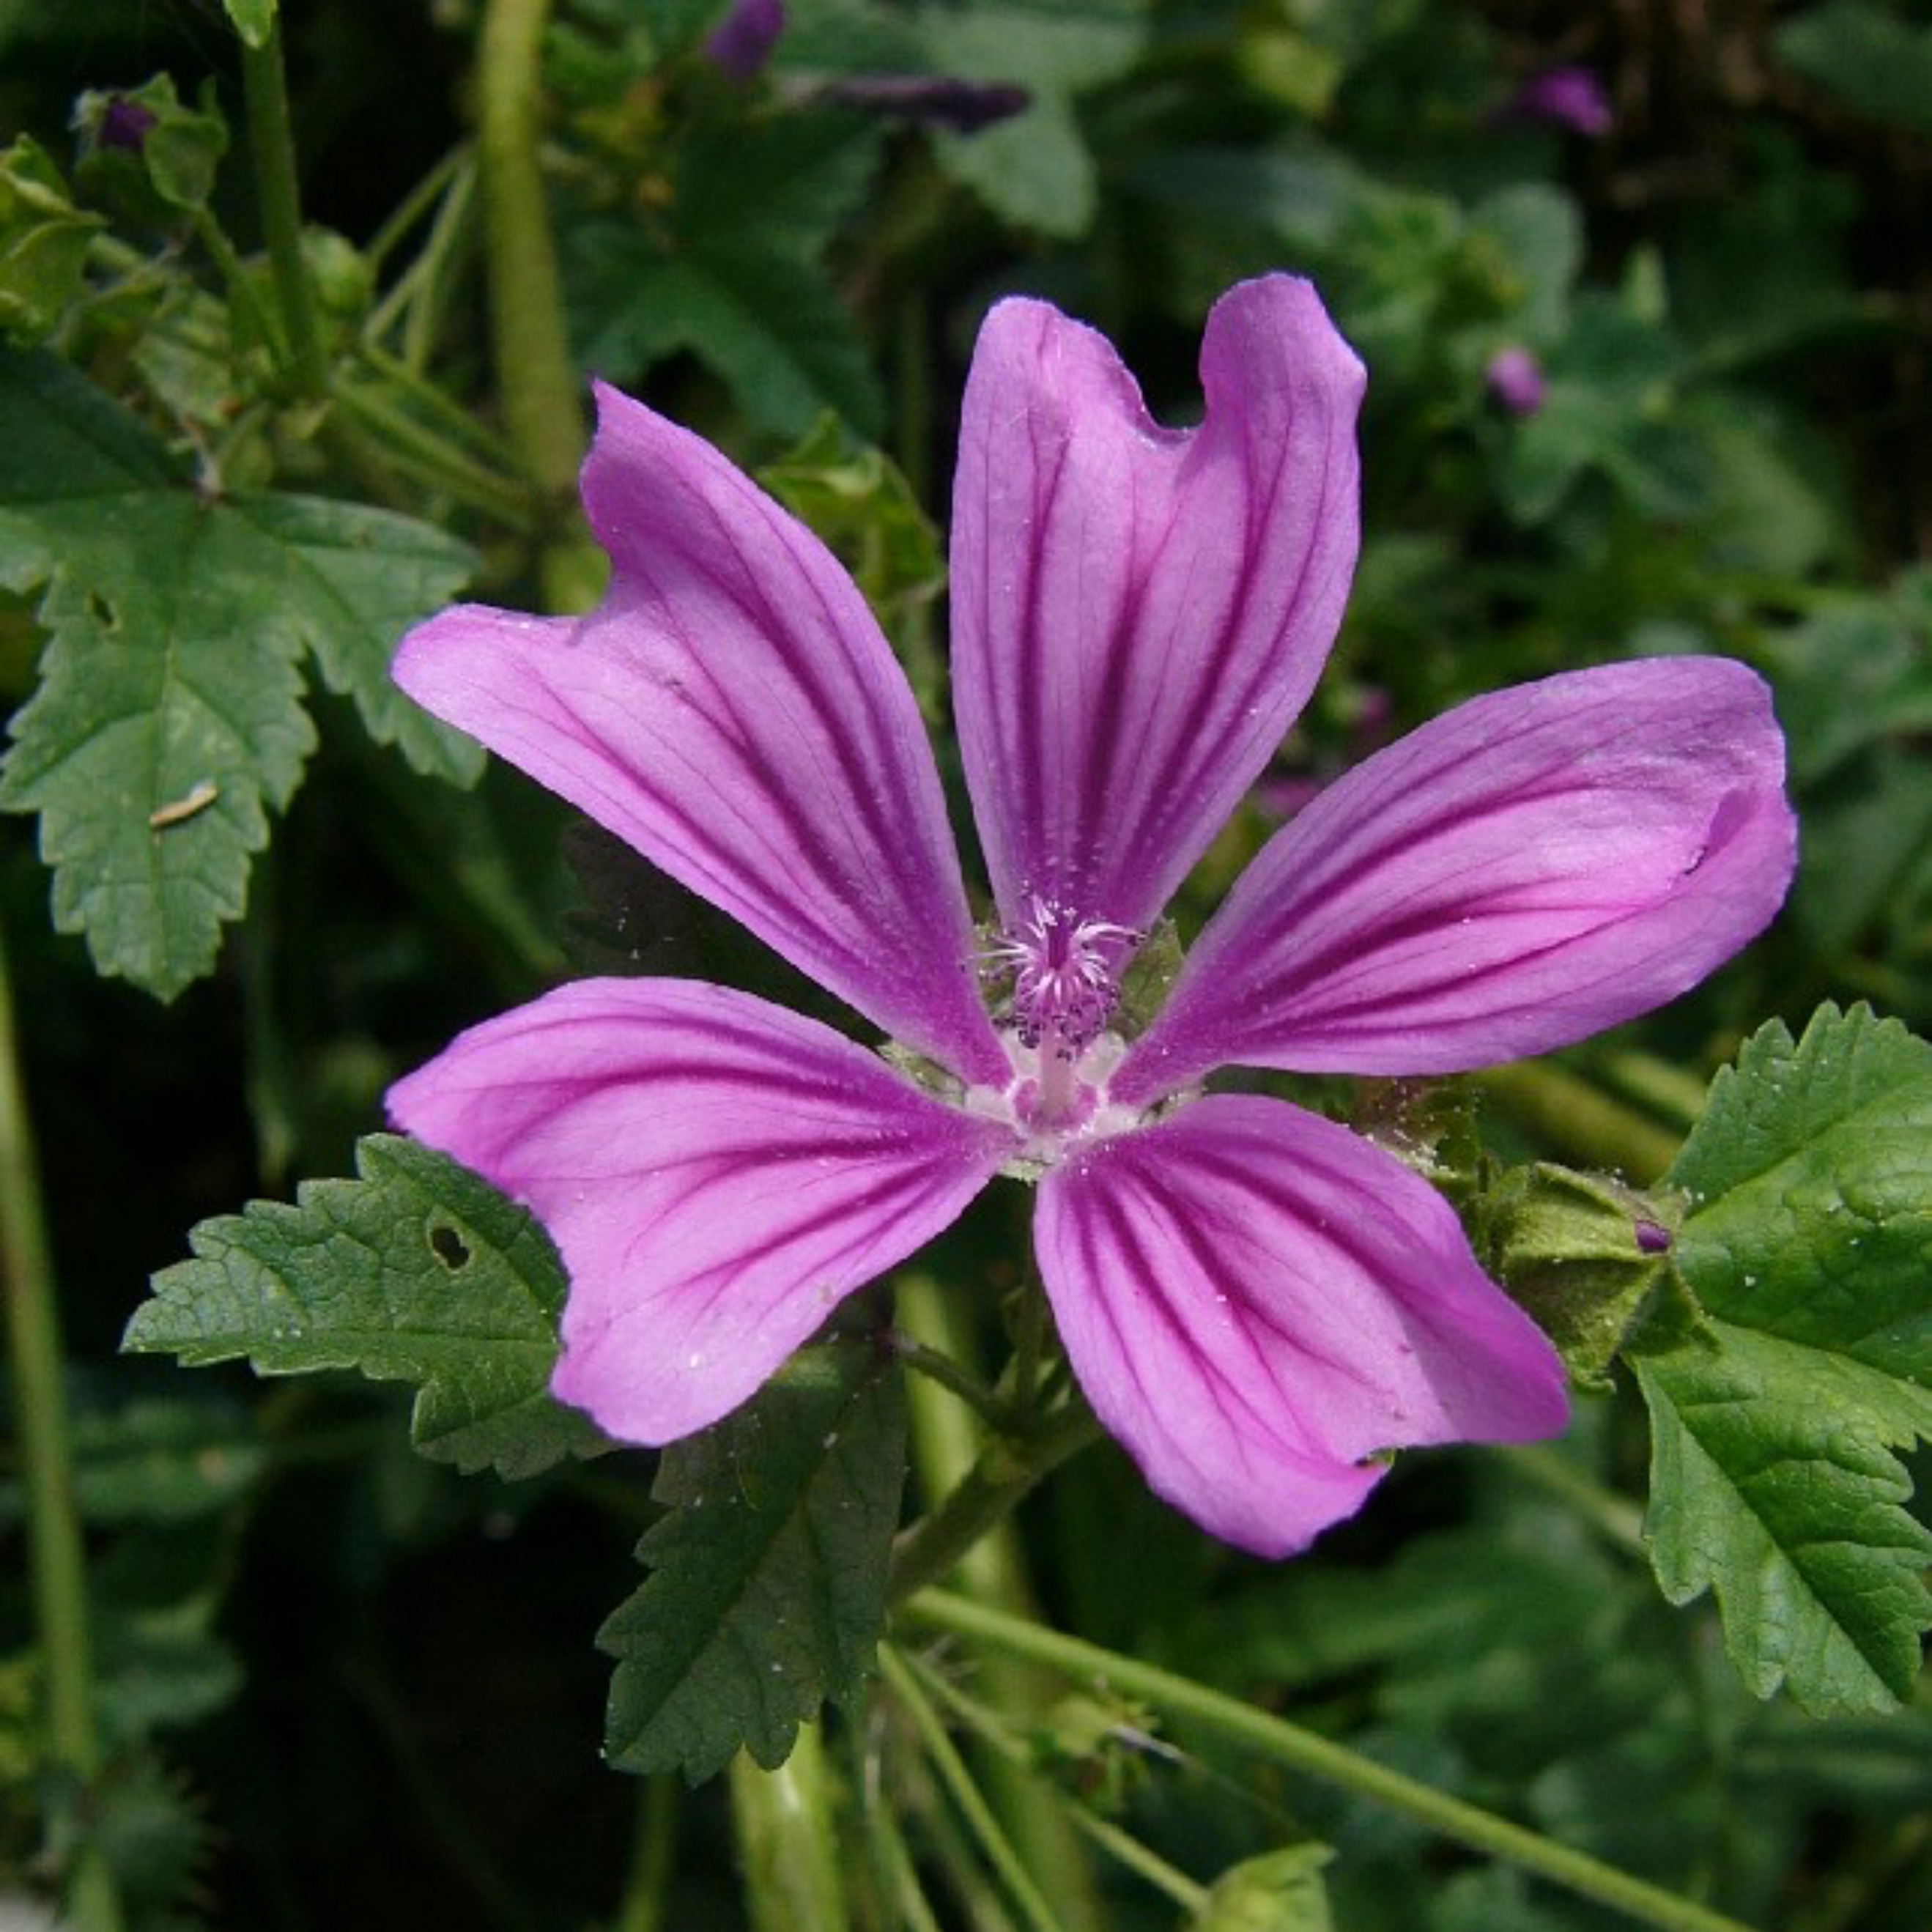 Common mallow cultivation